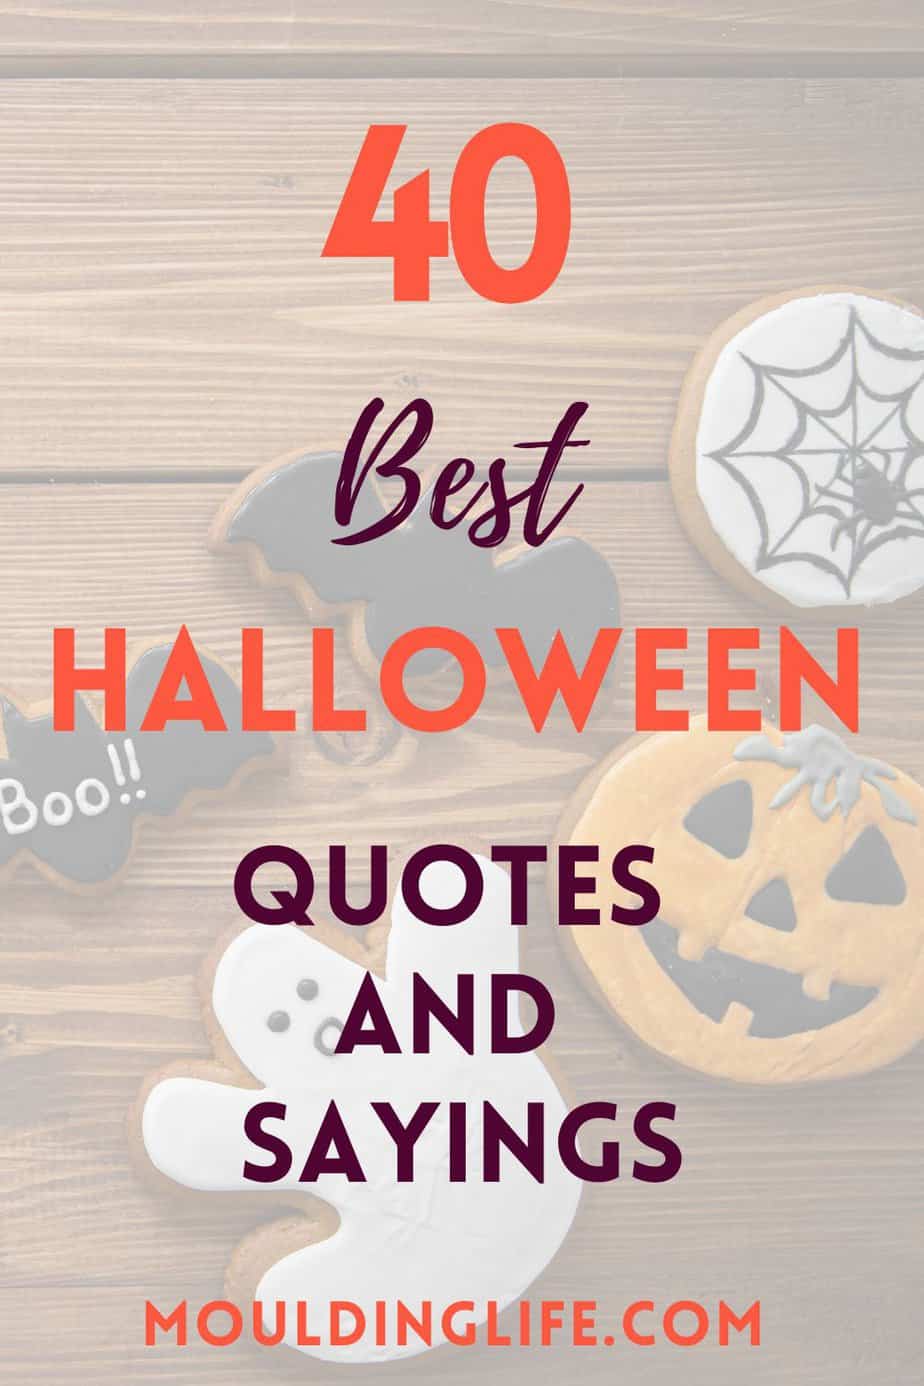 40 Best Halloween Quotes and Sayings - Moulding Life